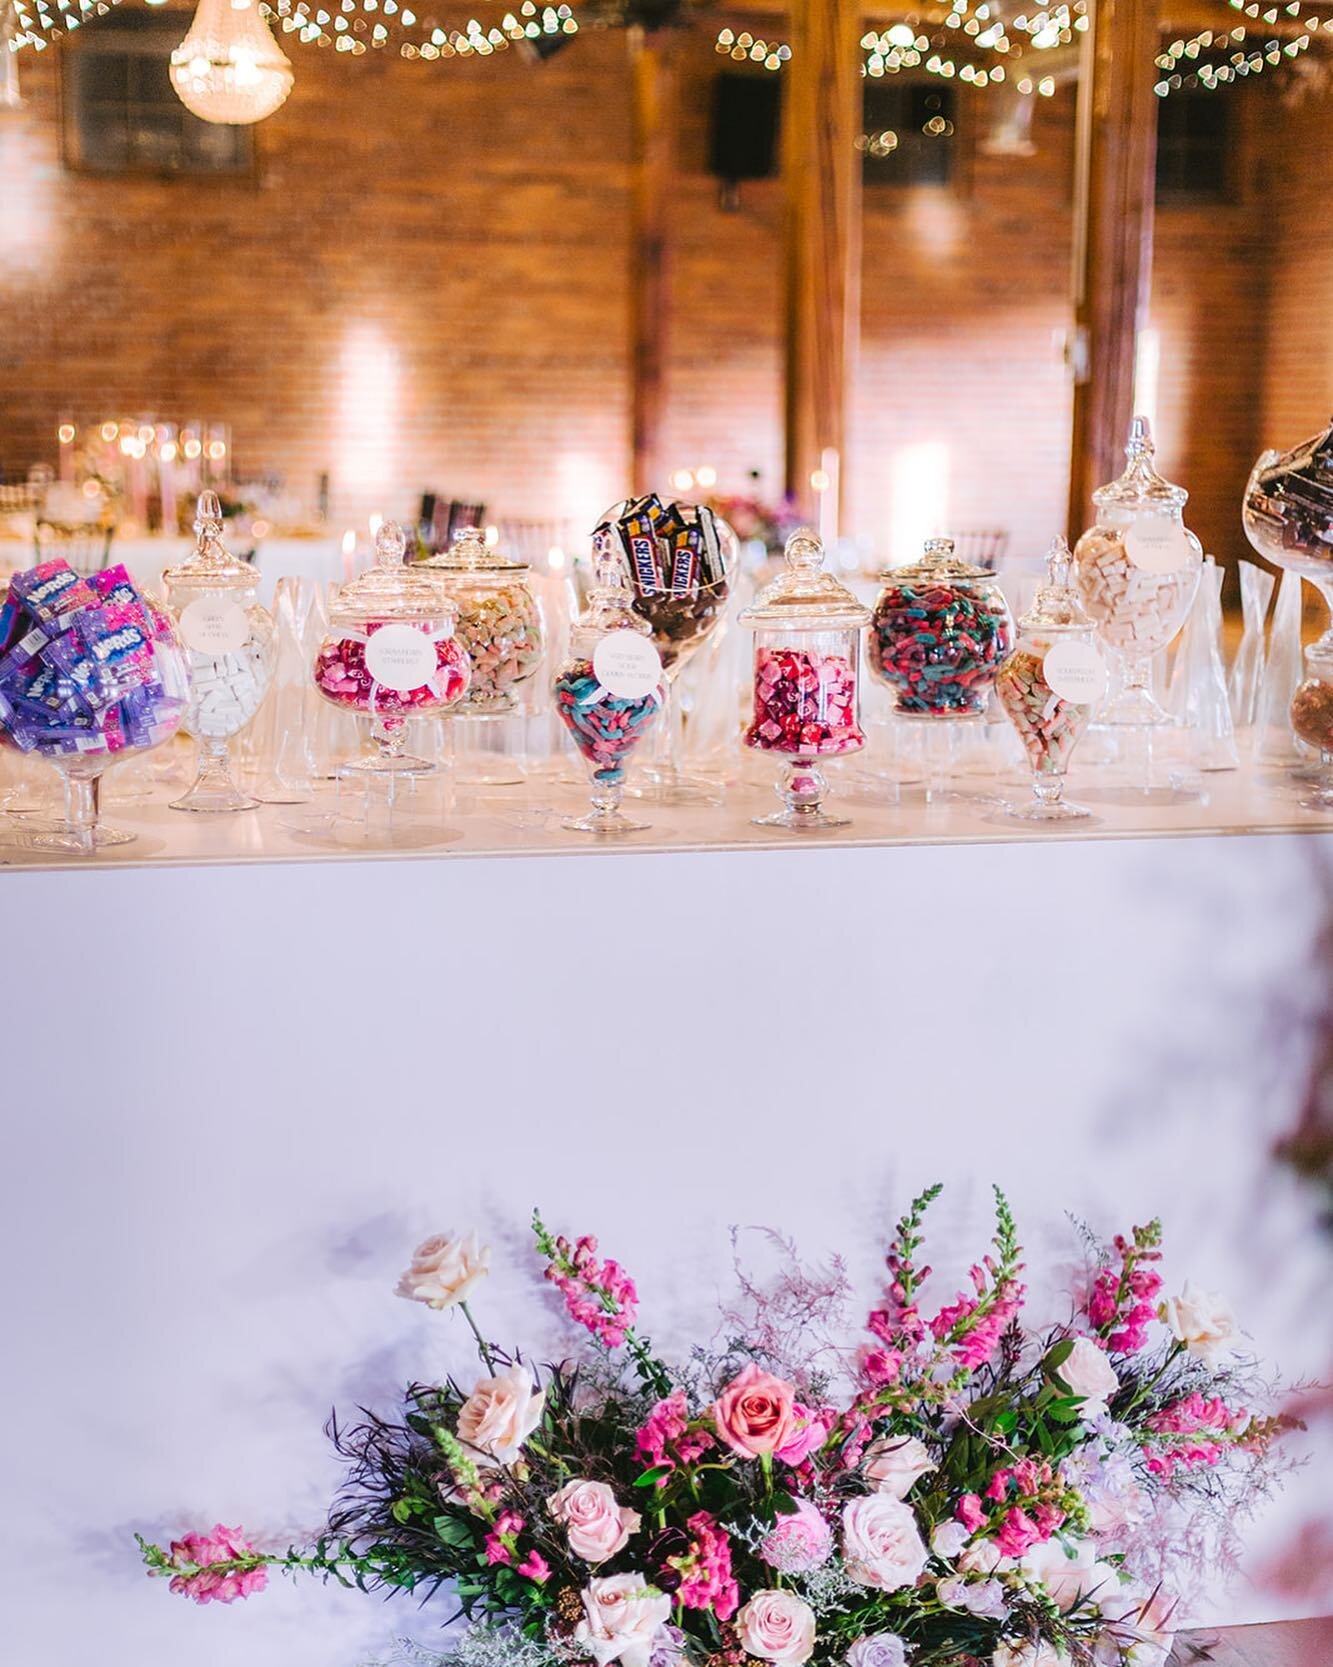 🍬Candy Crush much?!🍬 
.
We love how our display table is styled here with candy and gorgeous florals! 
.
Planner -  @emilyventuradesigns 
Florals - @annegreyflowers 
Photograph - @annaclarkphoto 
Display - @elderflower_design 
Venue - @mavrisevents